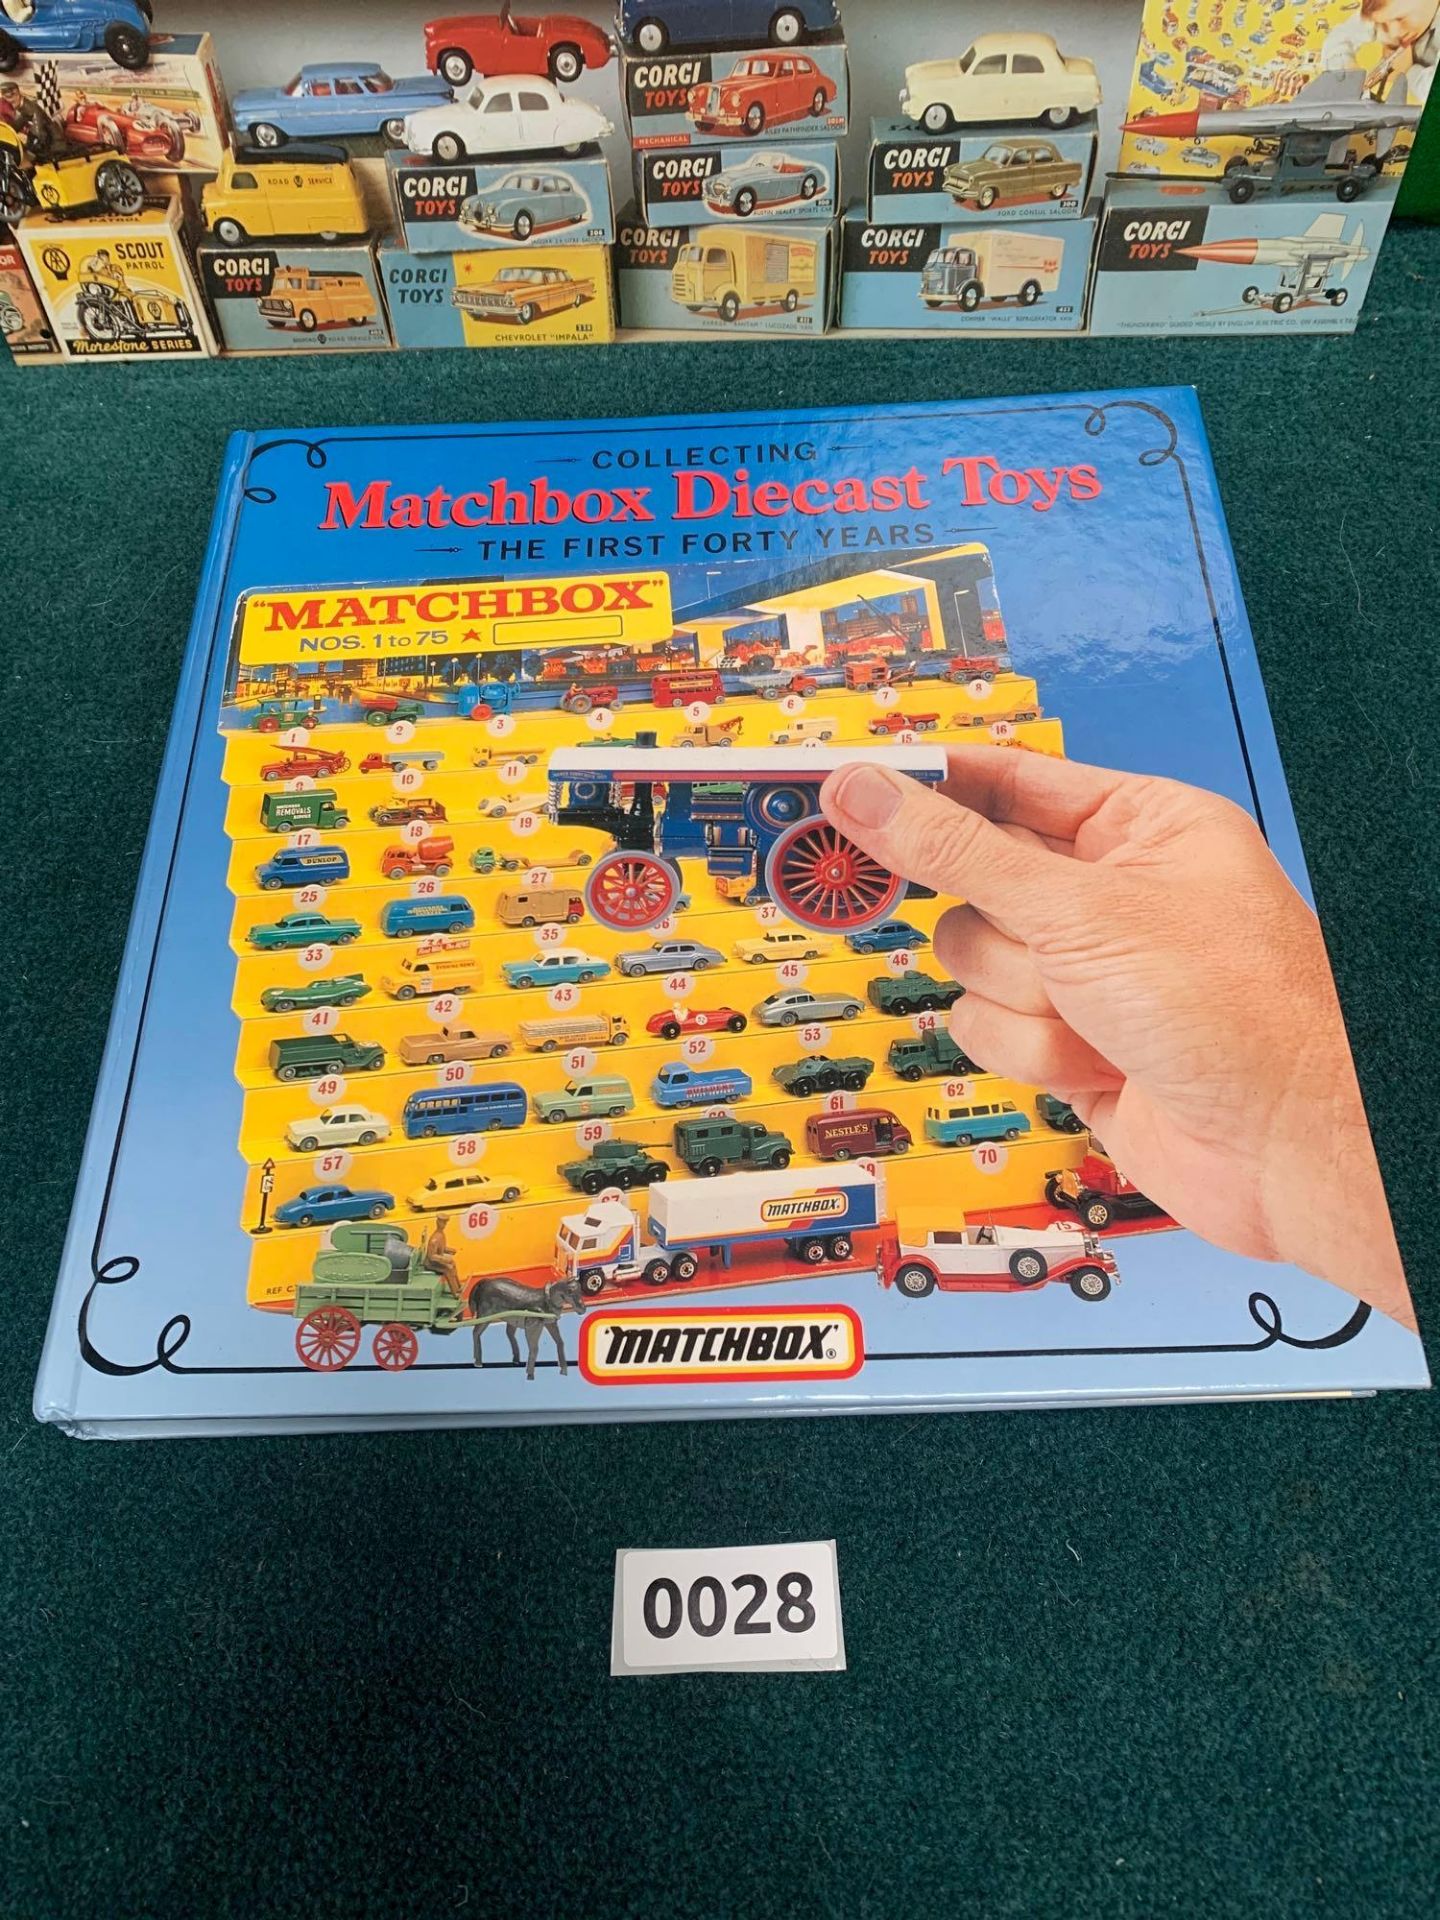 Collecting Matchbox Diecast Toys: First Forty Years  1 Jun. 1989